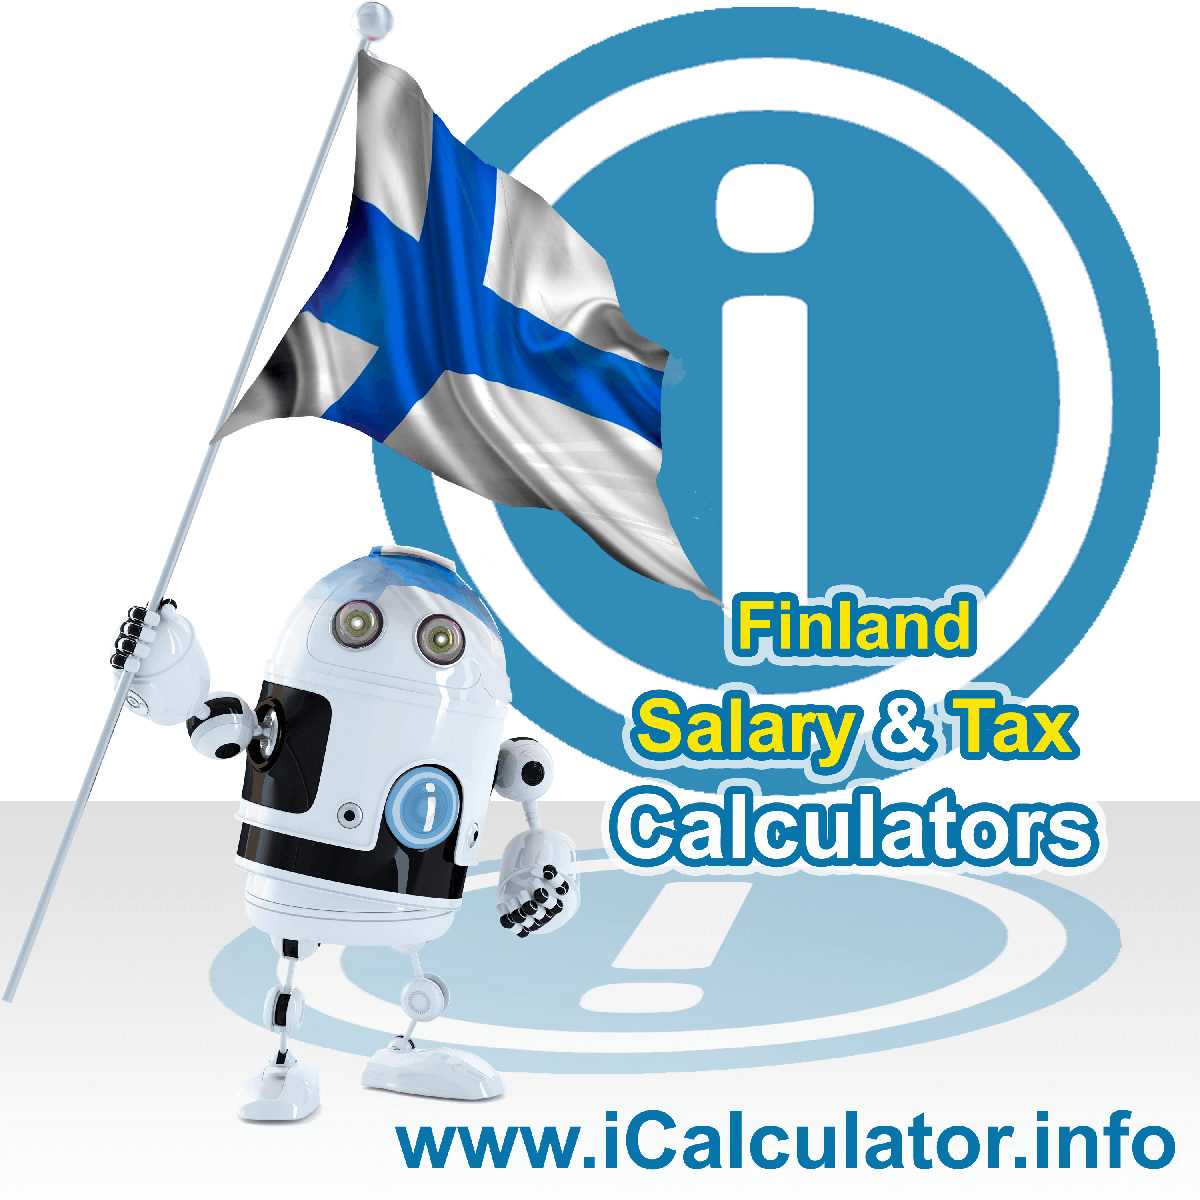 Finland Salary Calculator. This image shows the Finlandese flag and information relating to the tax formula for the Finland Tax Calculator